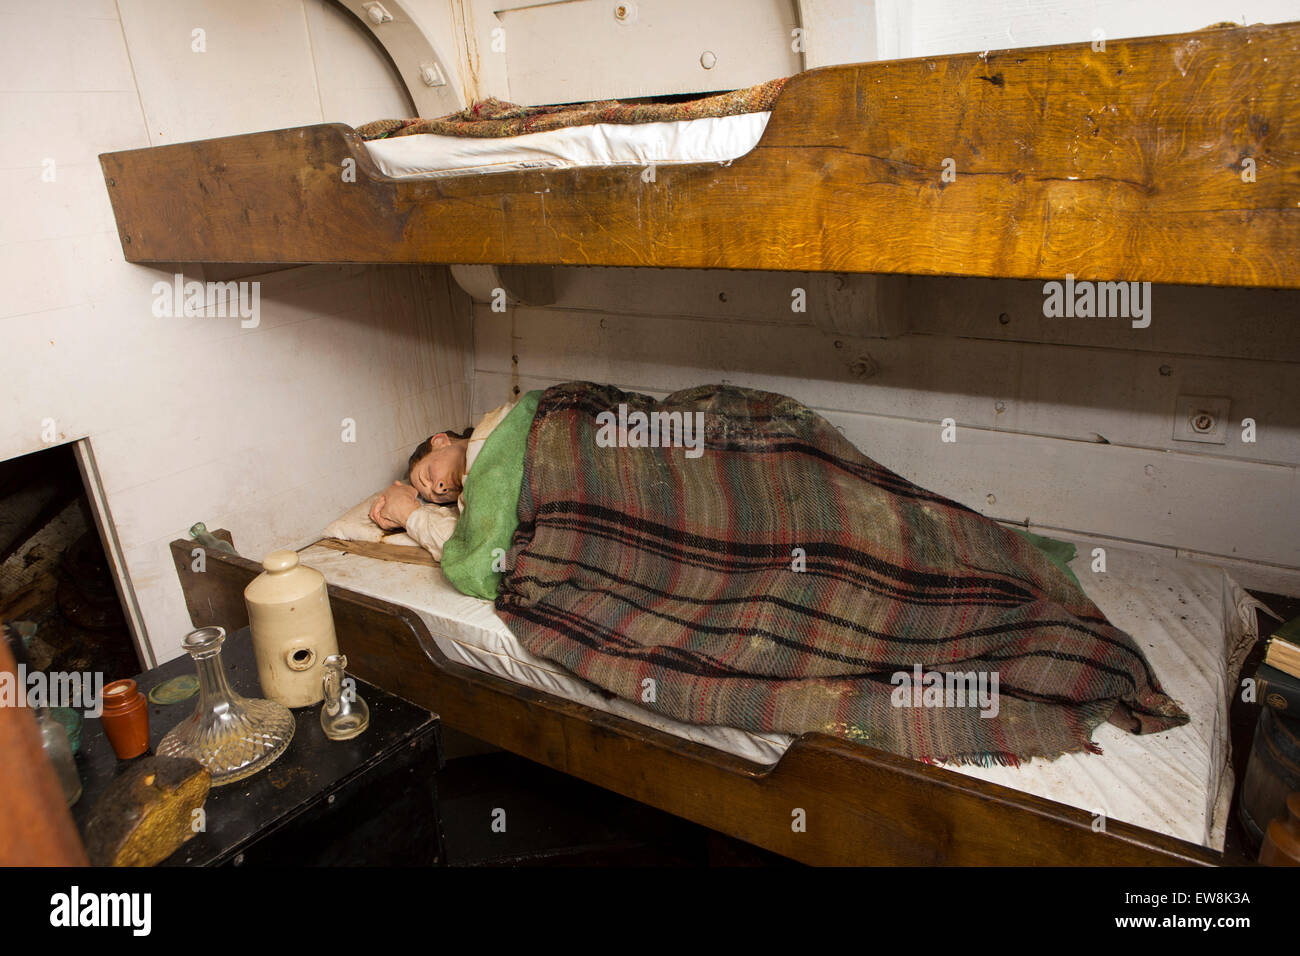 Ireland, Co Wexford, New Ross, First Class cabin first class bunks inside 1845 emigrant ship Dunbrody Stock Photo